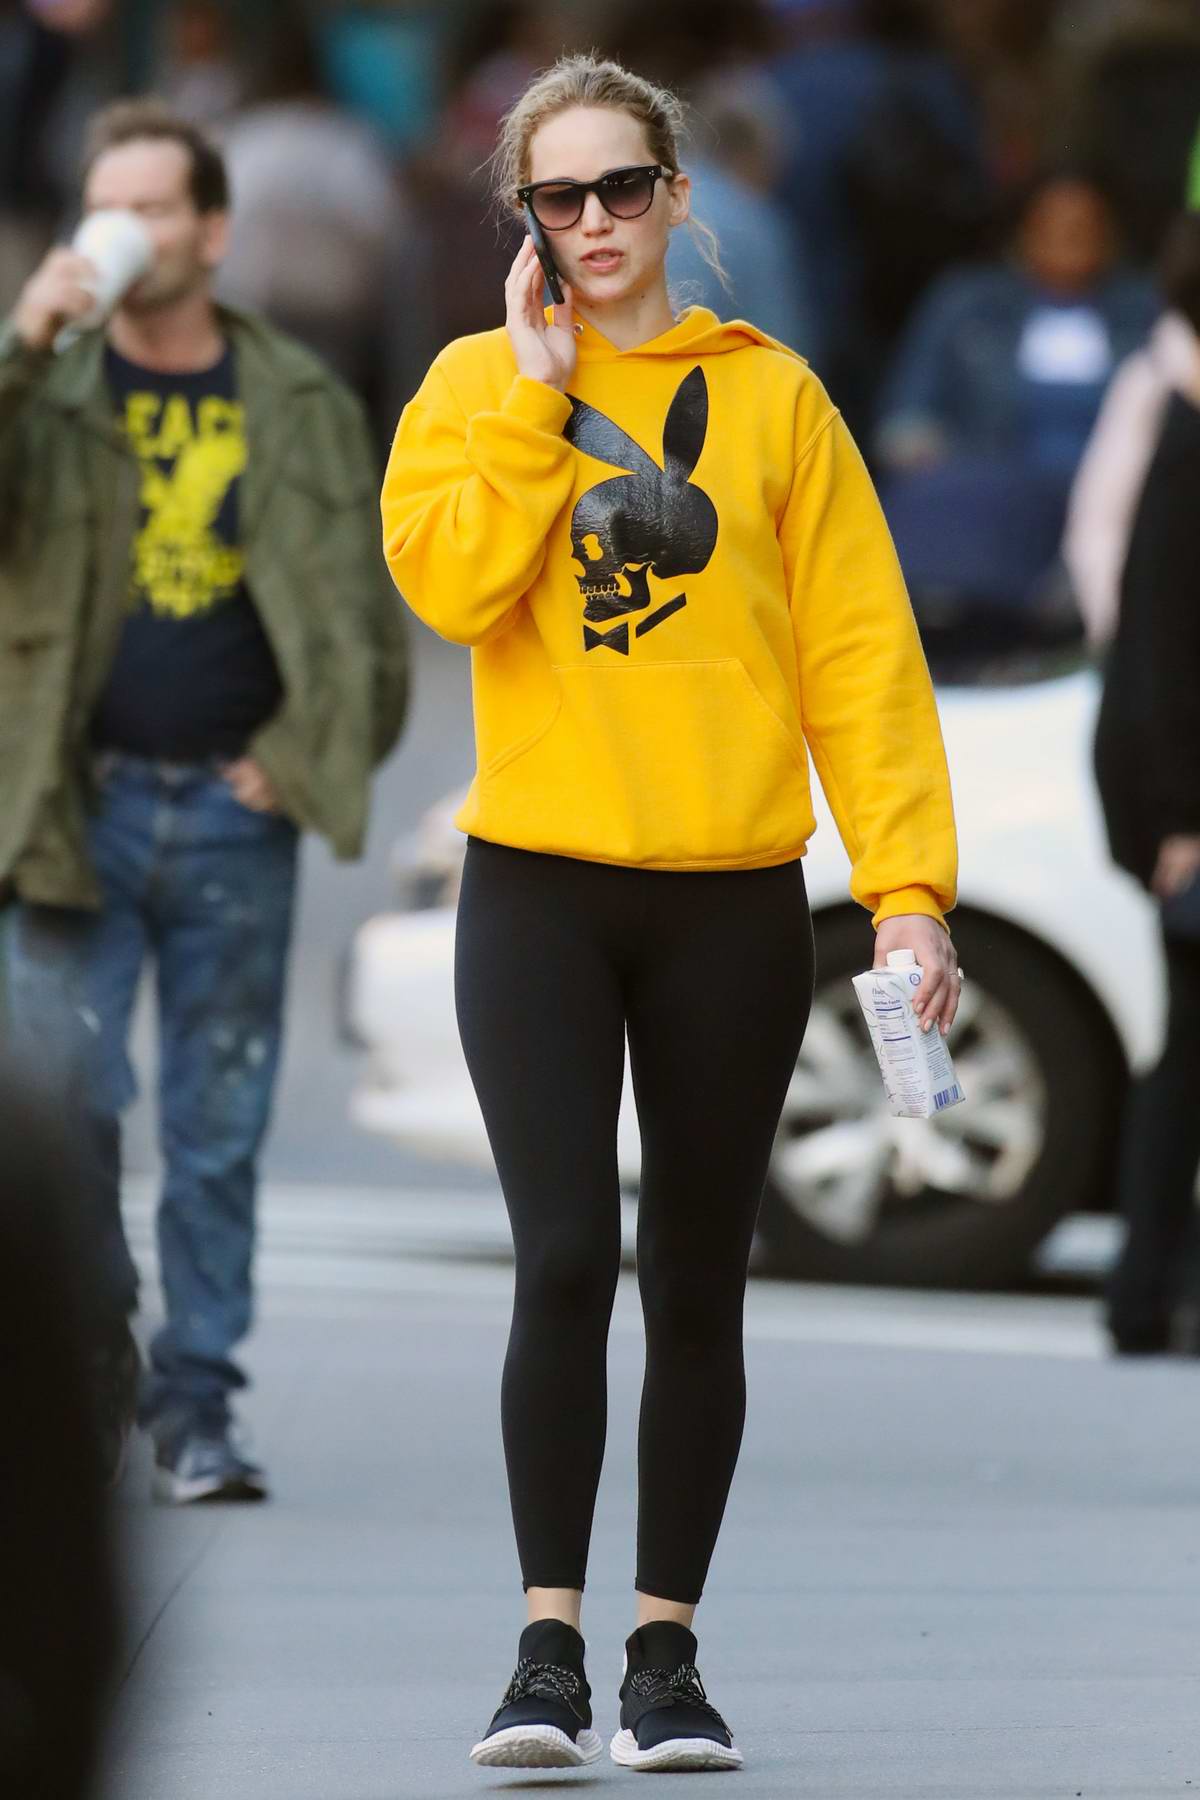 https://www.celebsfirst.com/wp-content/uploads/2019/10/jennifer-lawrence-rocks-a-bright-yellow-hoodie-and-black-leggings-while-heading-to-the-gym-in-new-york-city-071019_6.jpg